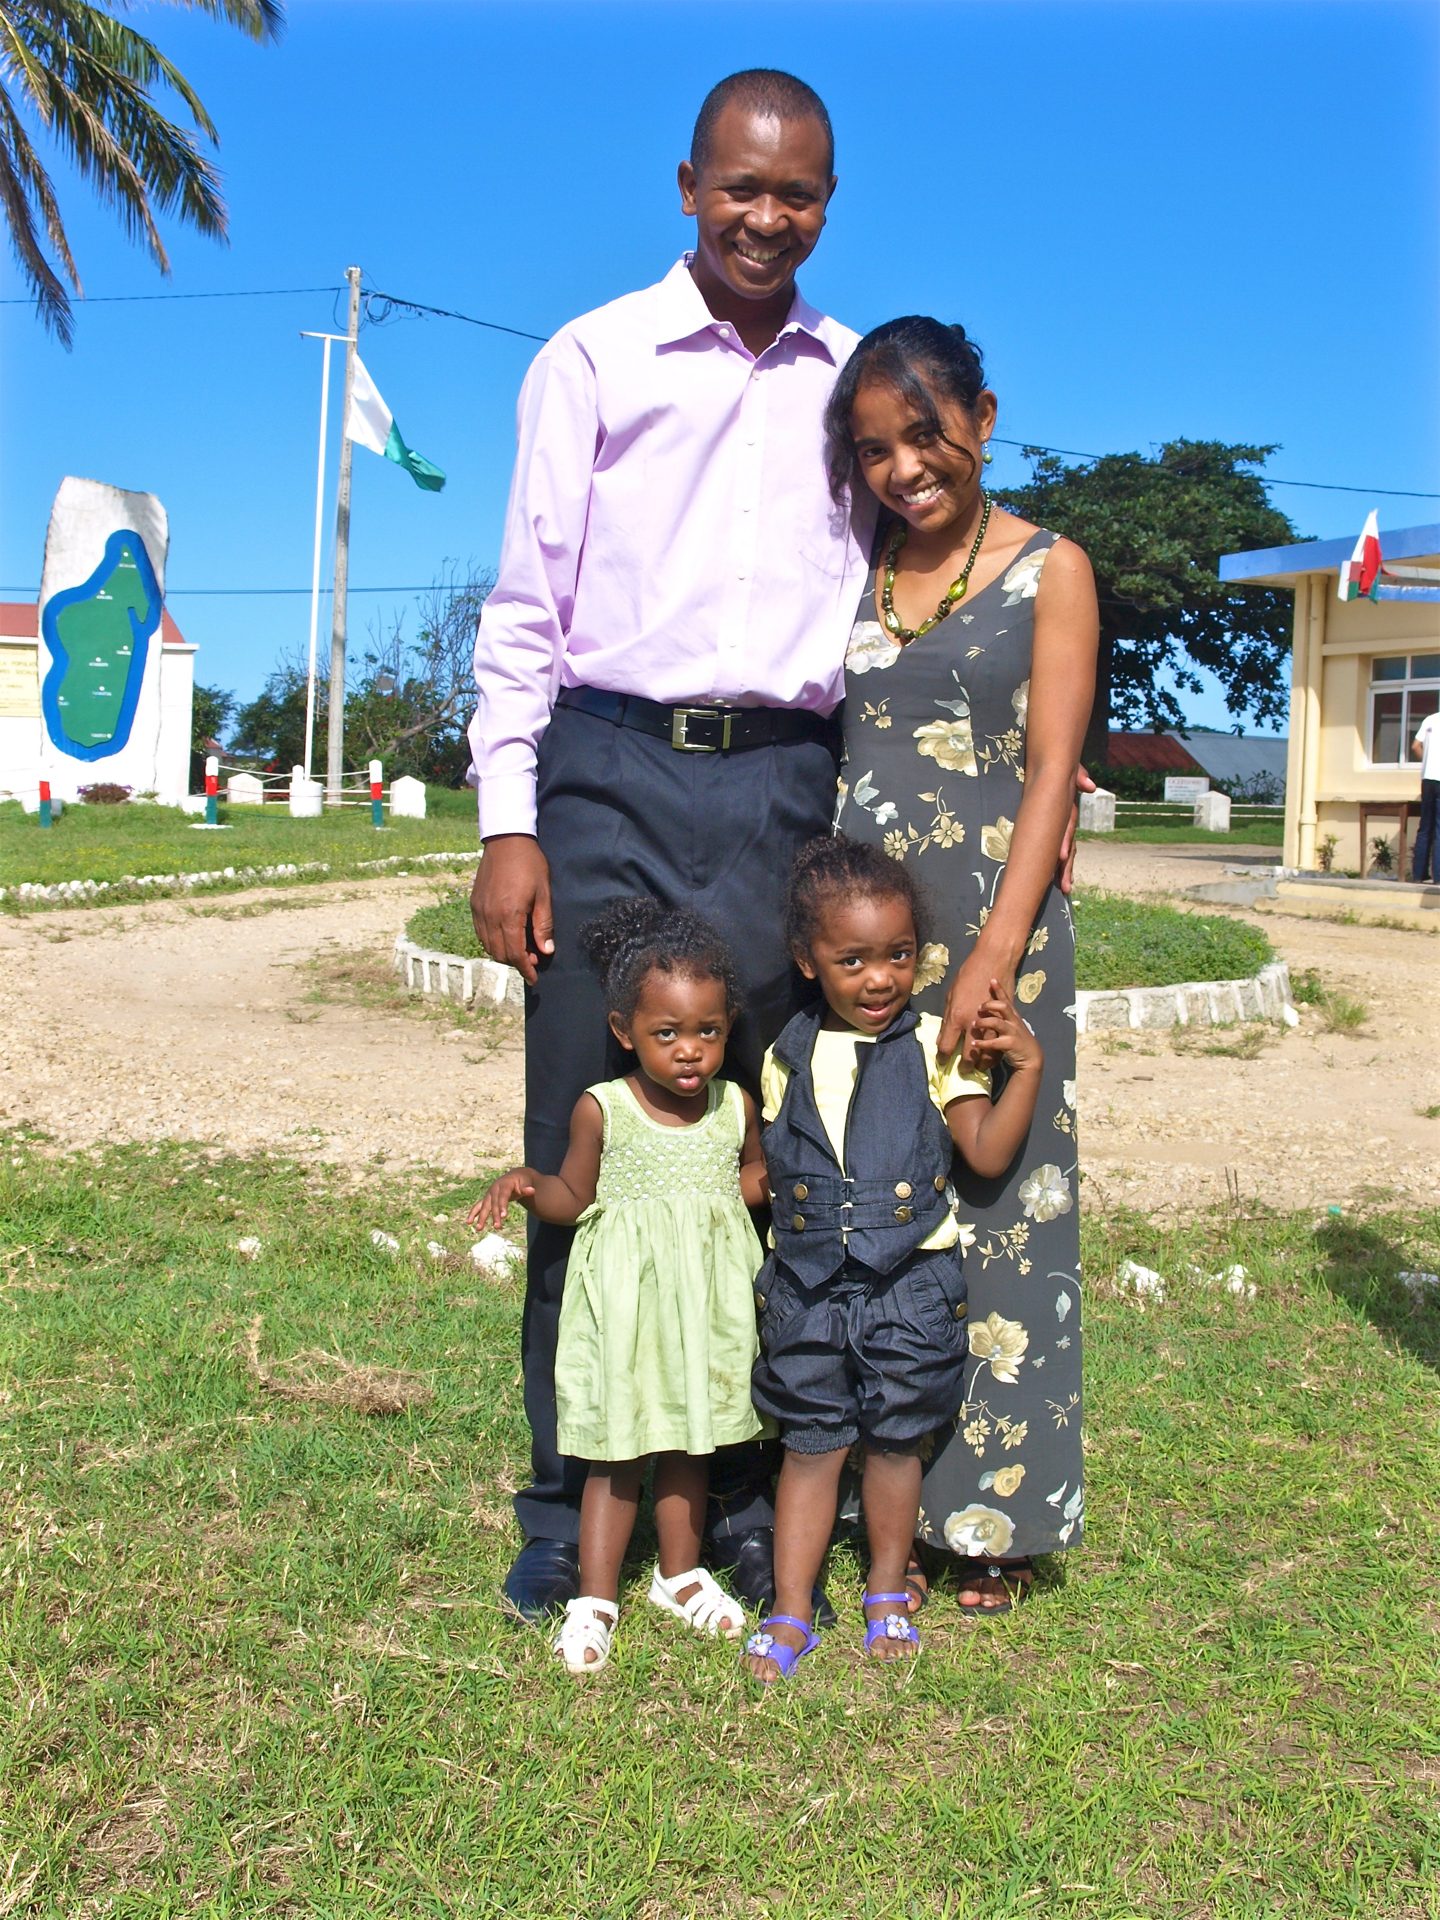 Mamitiana, Toky and Family from The Mission House in Madagascar